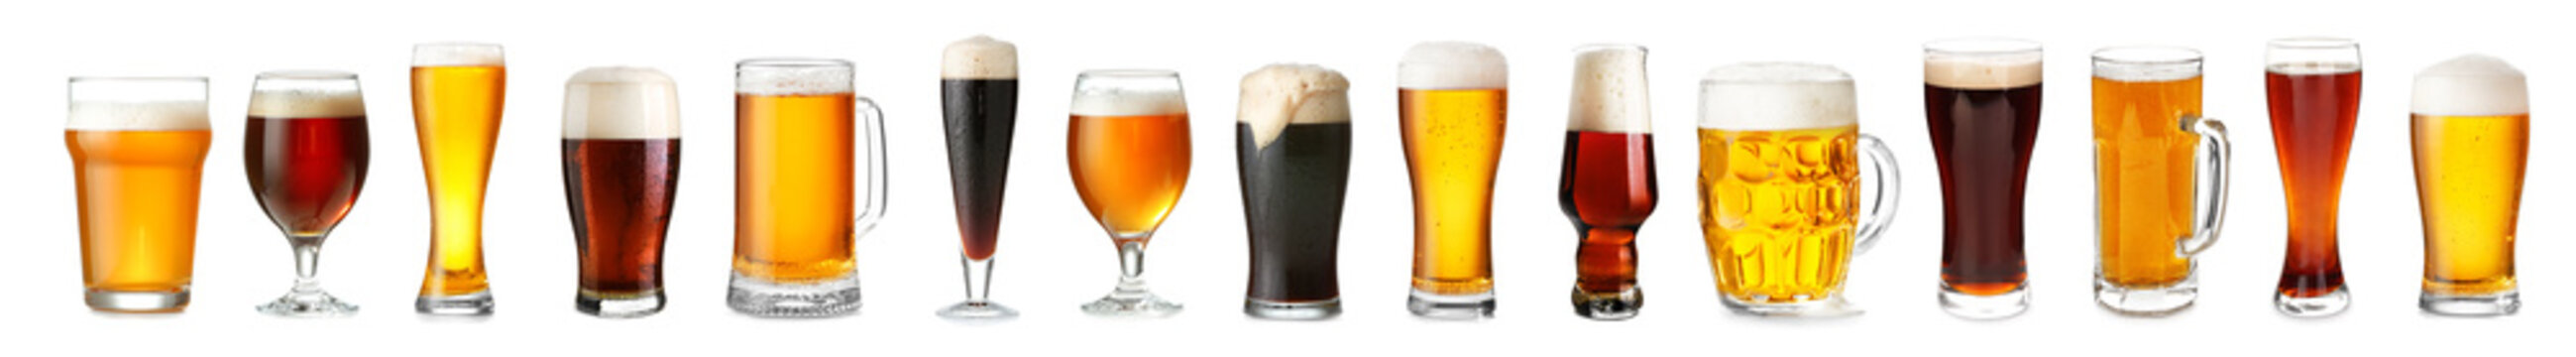 Glassware with fresh beer on white background